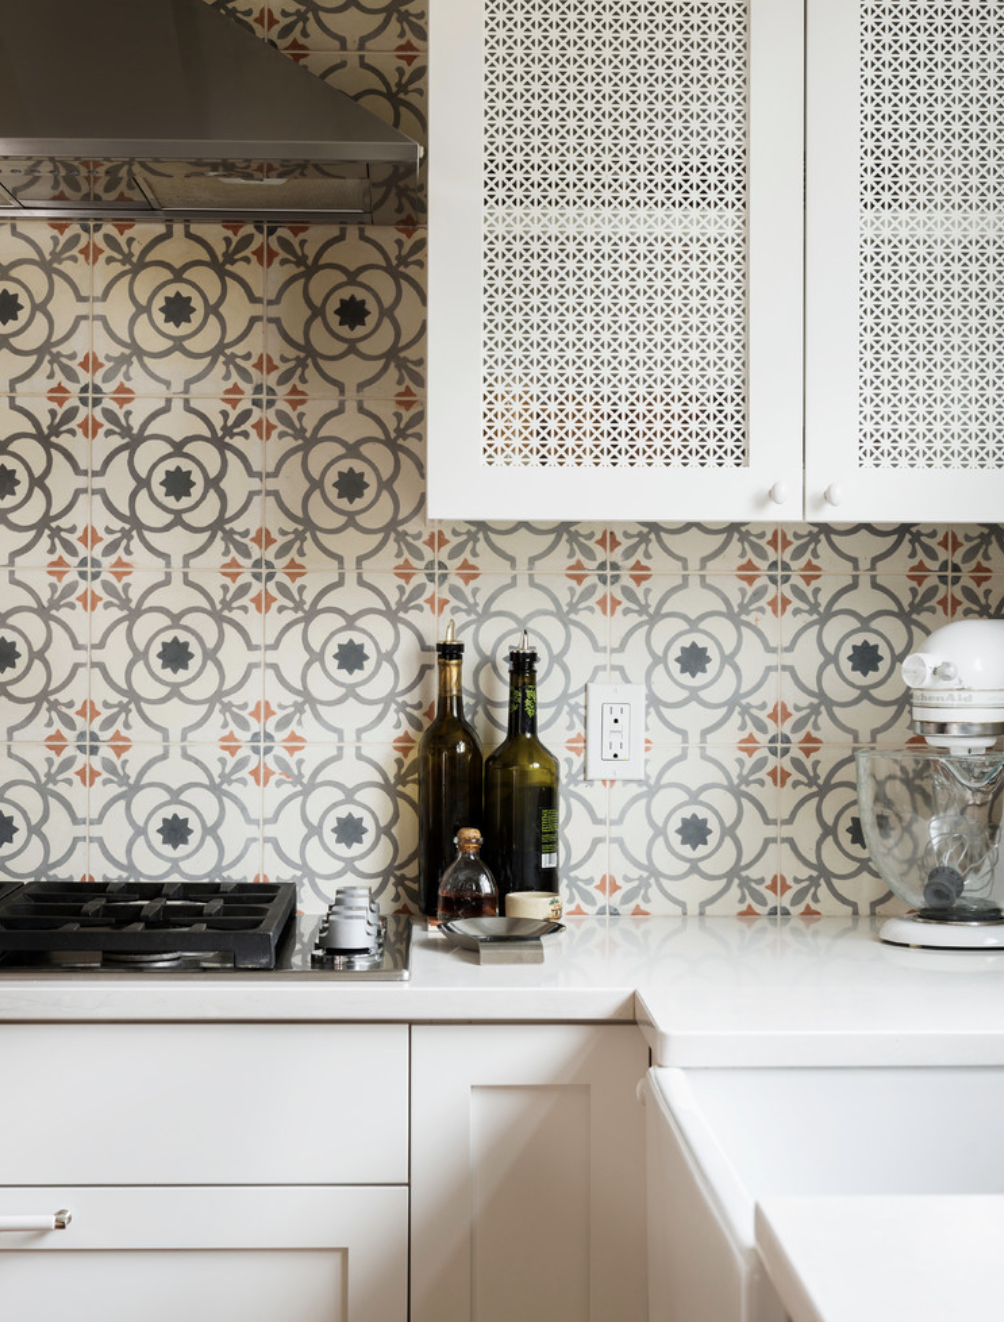 Fave Finishes // Moroccan Tiles & Steel Mesh